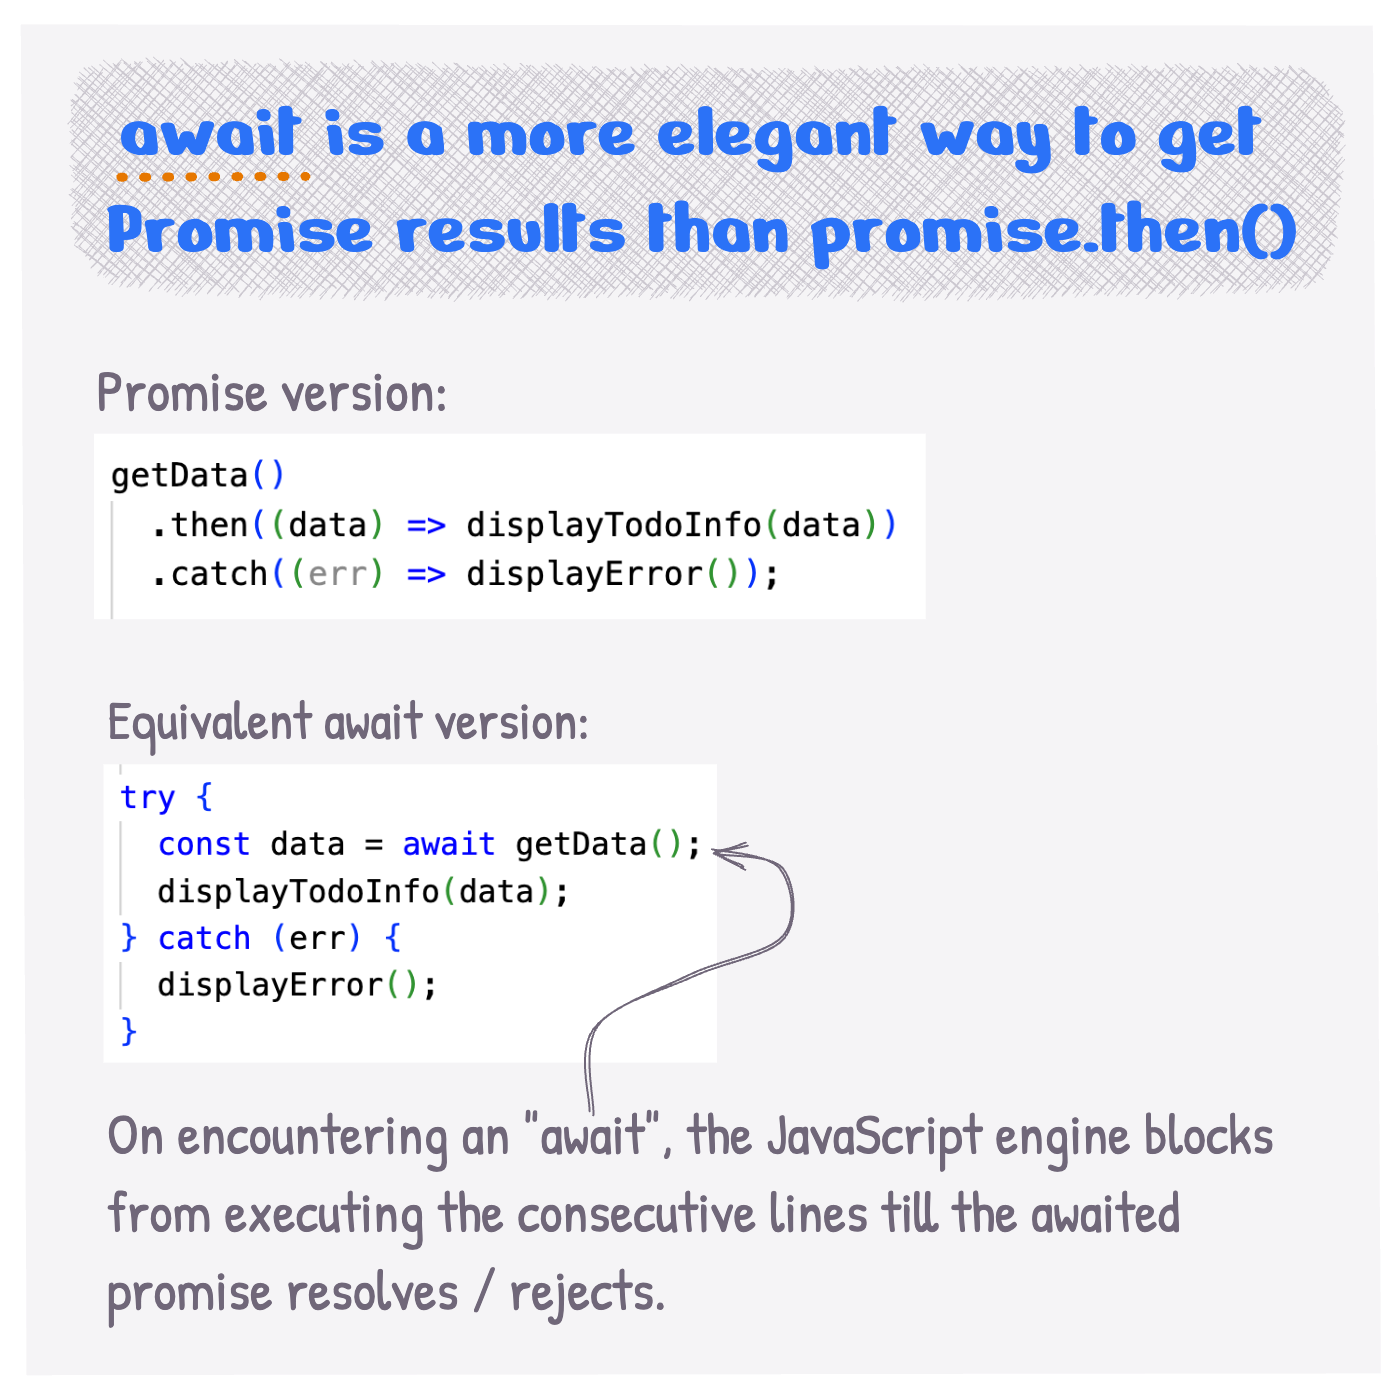 Await is a more elegant way to get Promise results than promise.then().